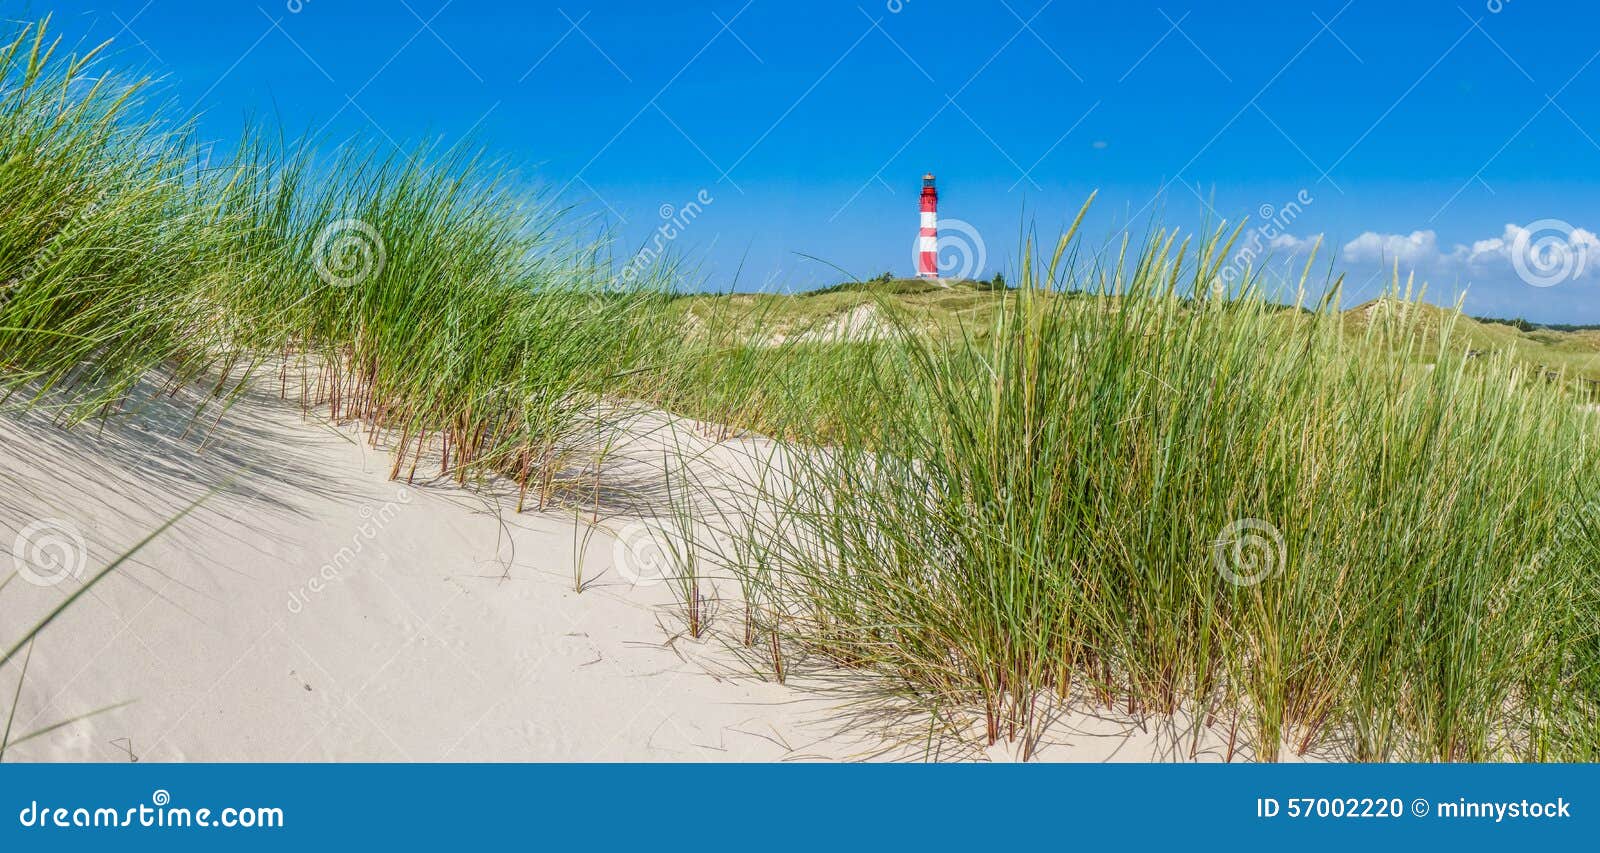 beautiful dune landscape with traditional lighthouse at north sea, schleswig-holstein, north sea, germany